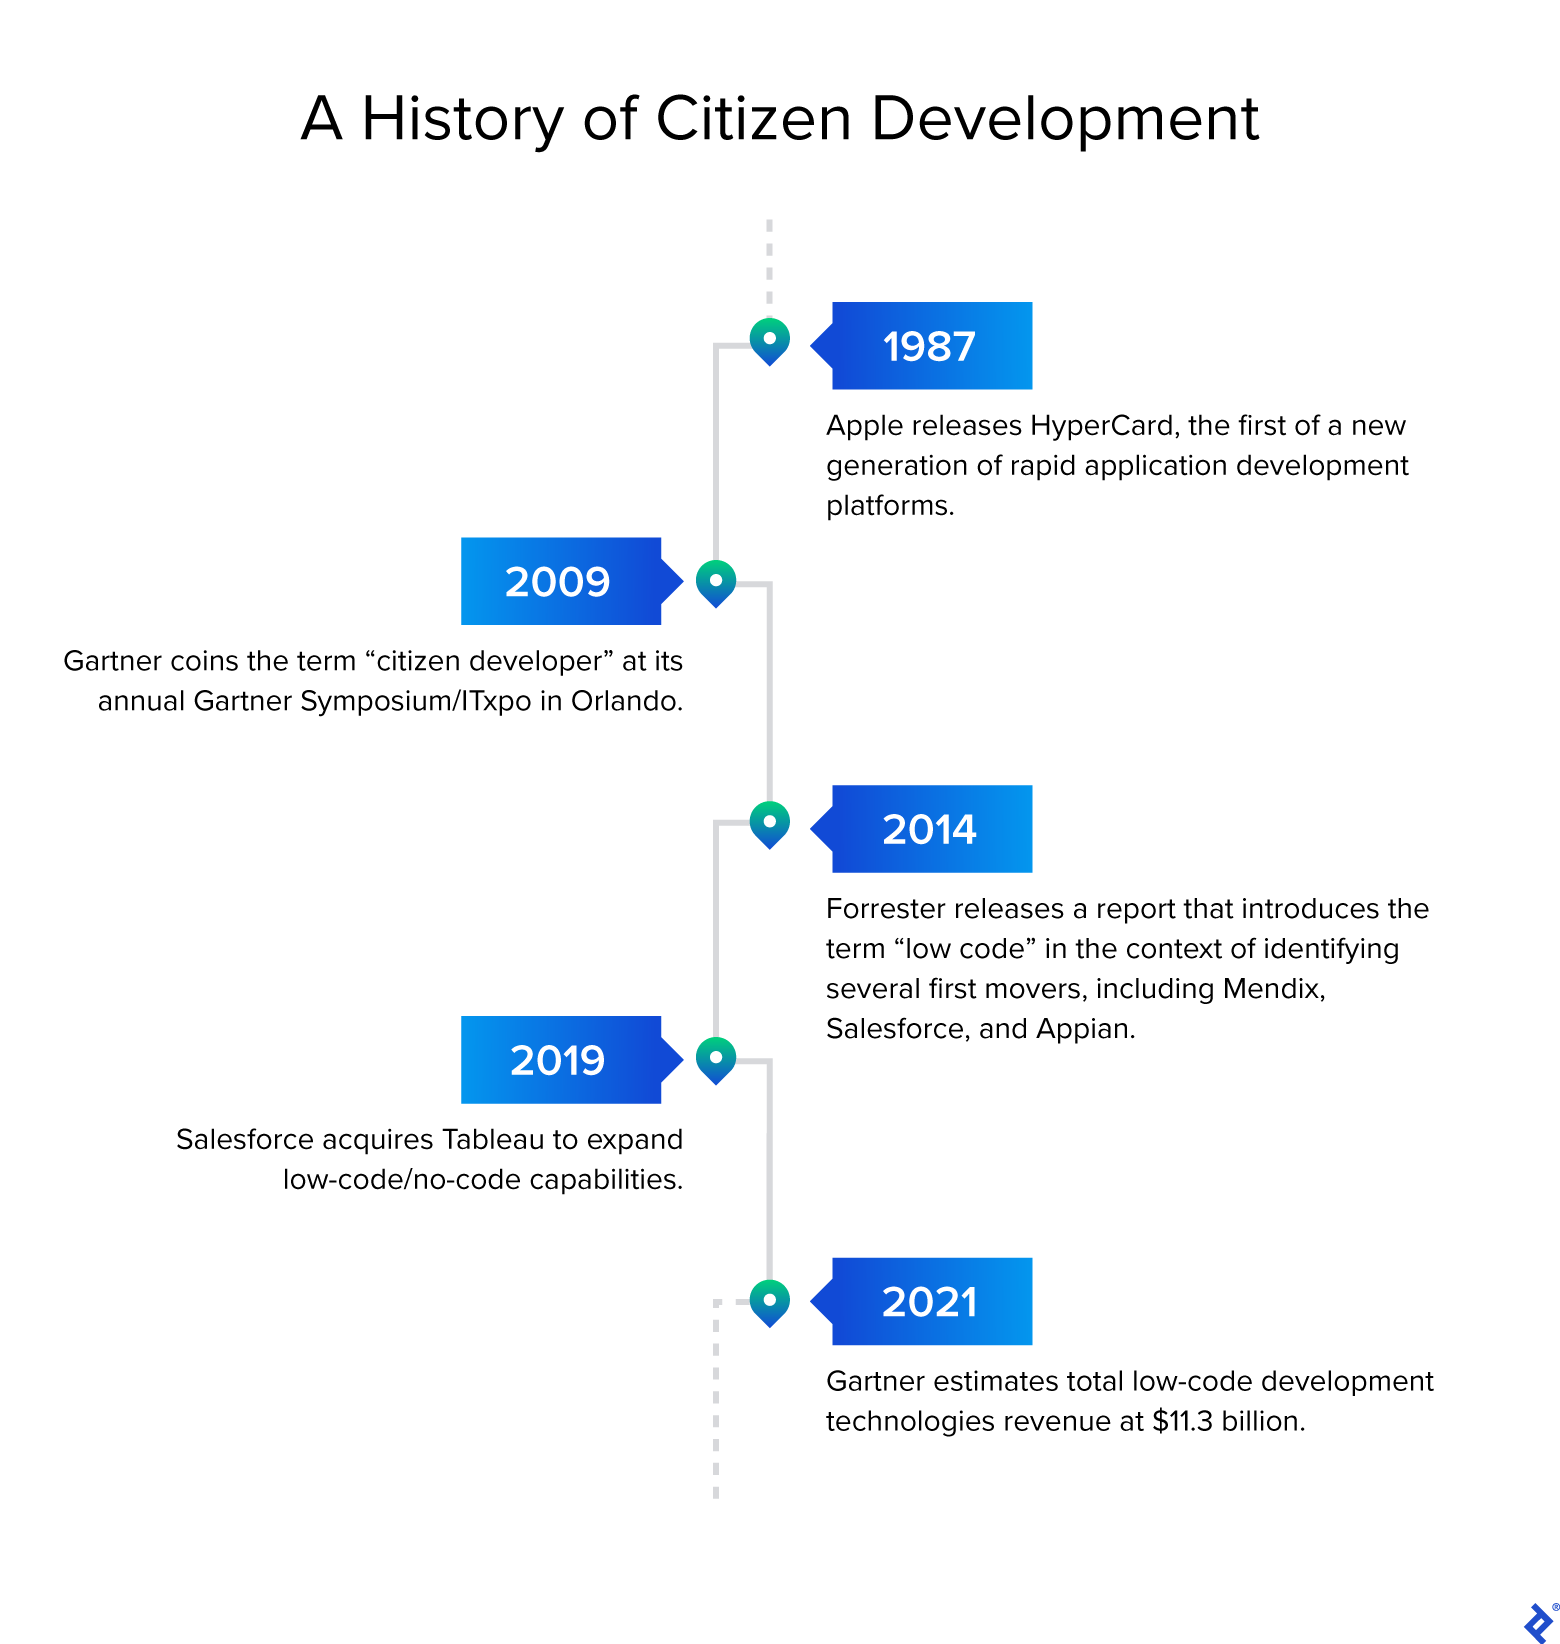 Is the Citizen Developer the New Face of Agility?